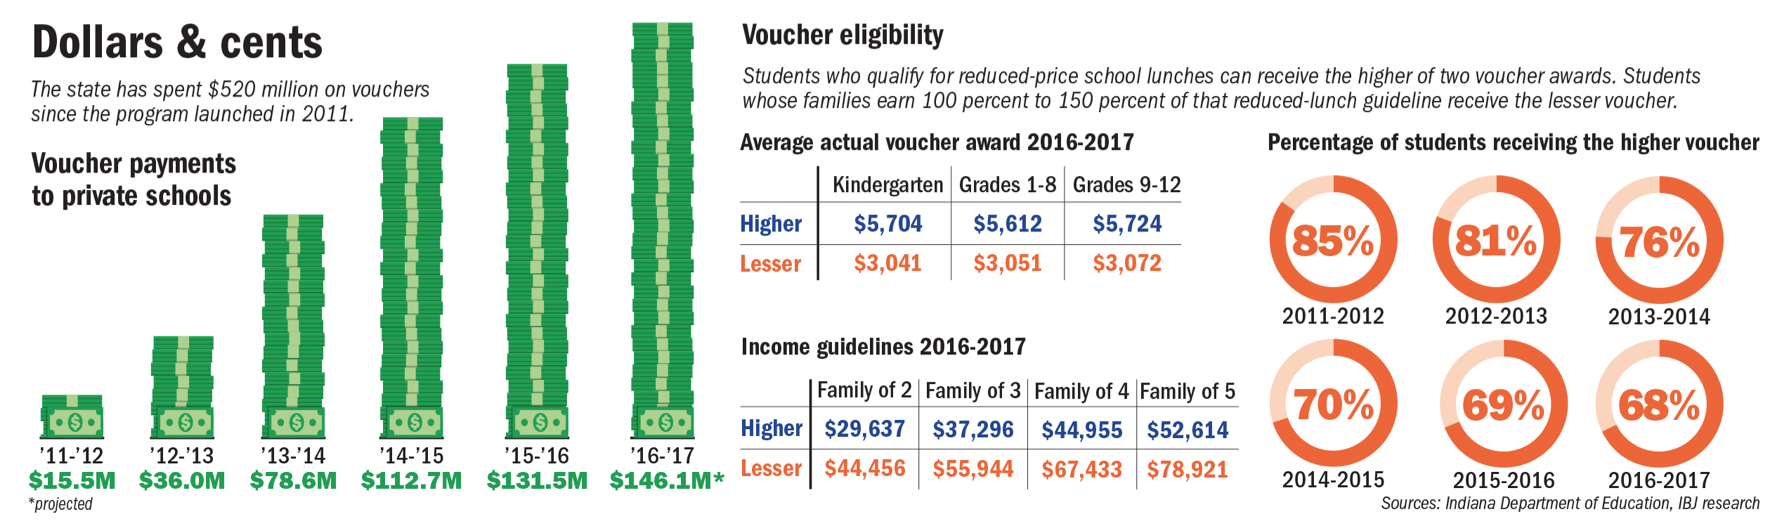 voucher graphic - dollars and cents smaller